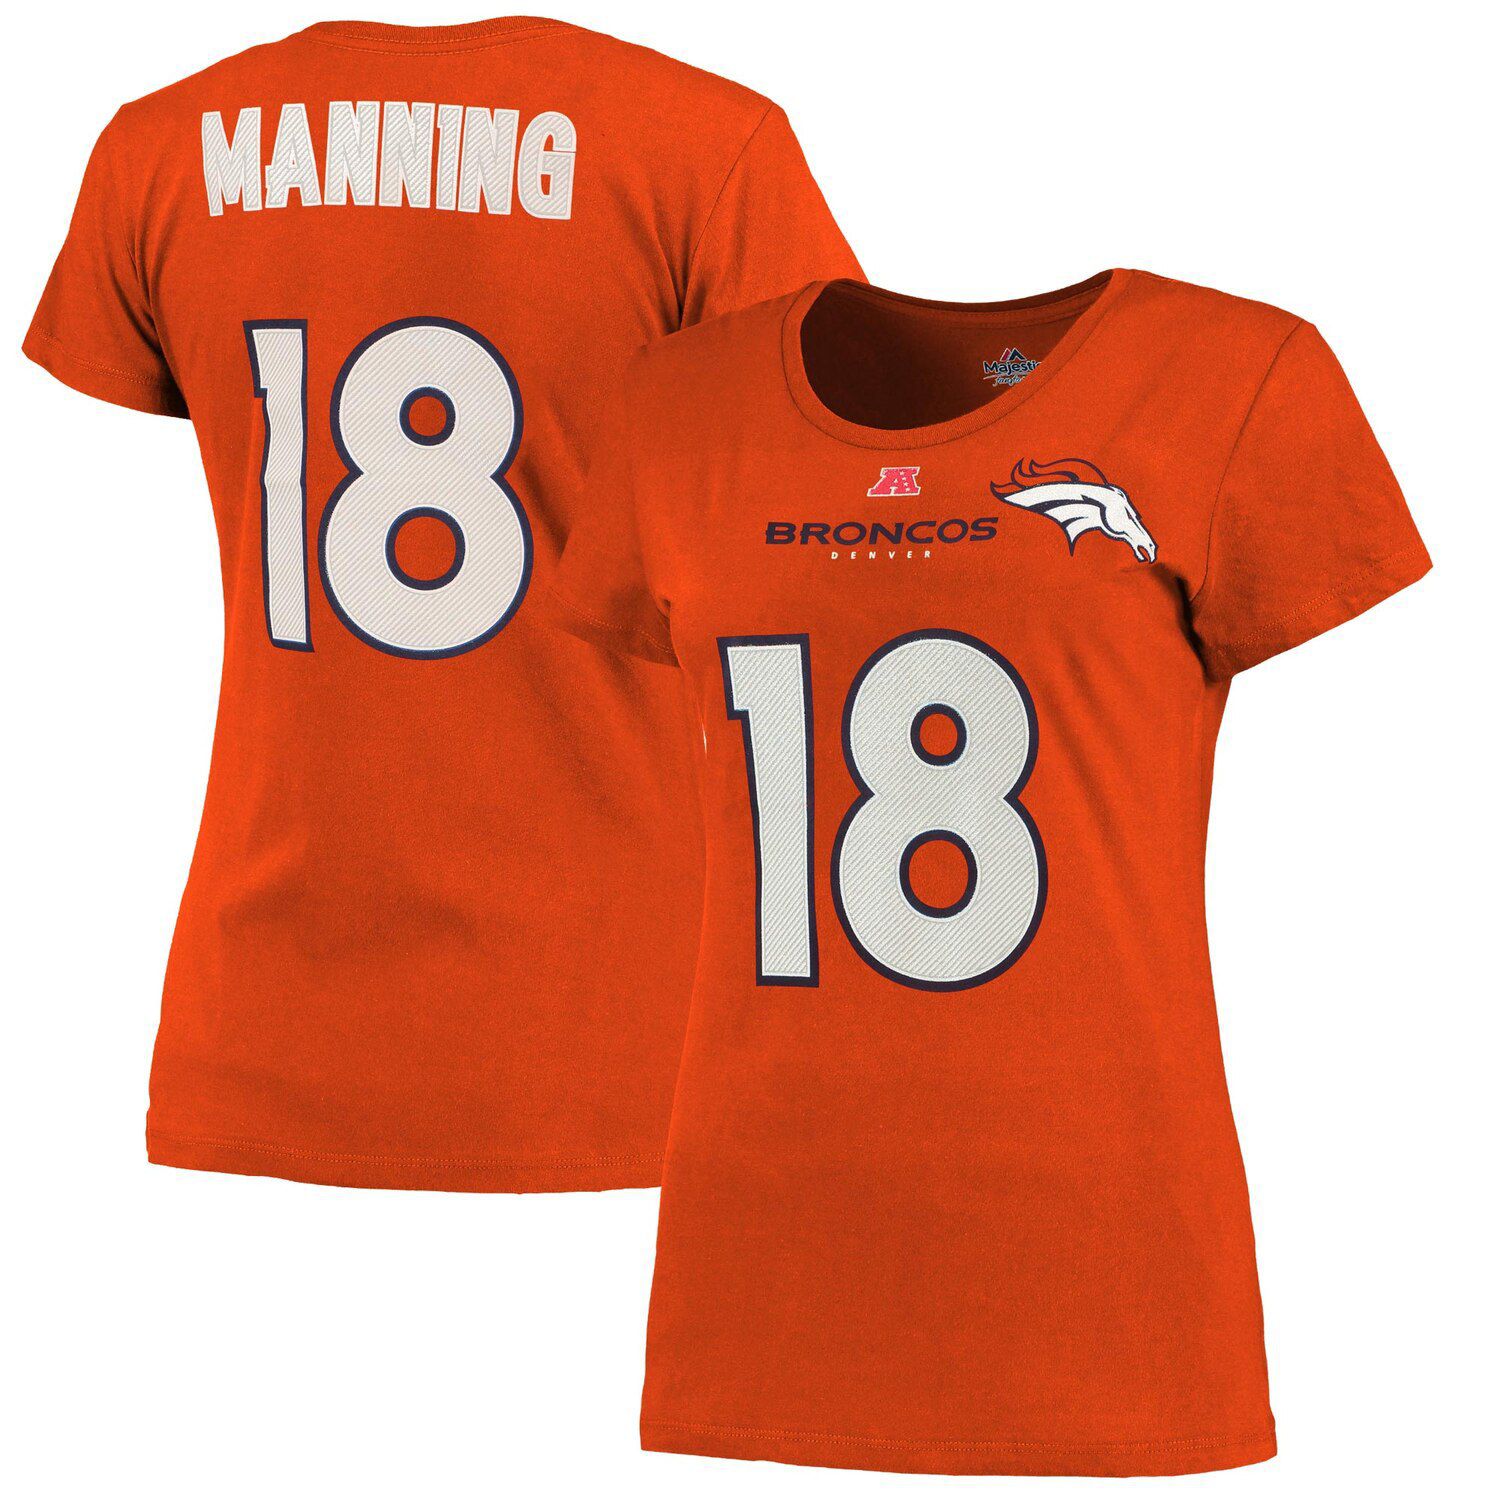 what is peyton manning's jersey number